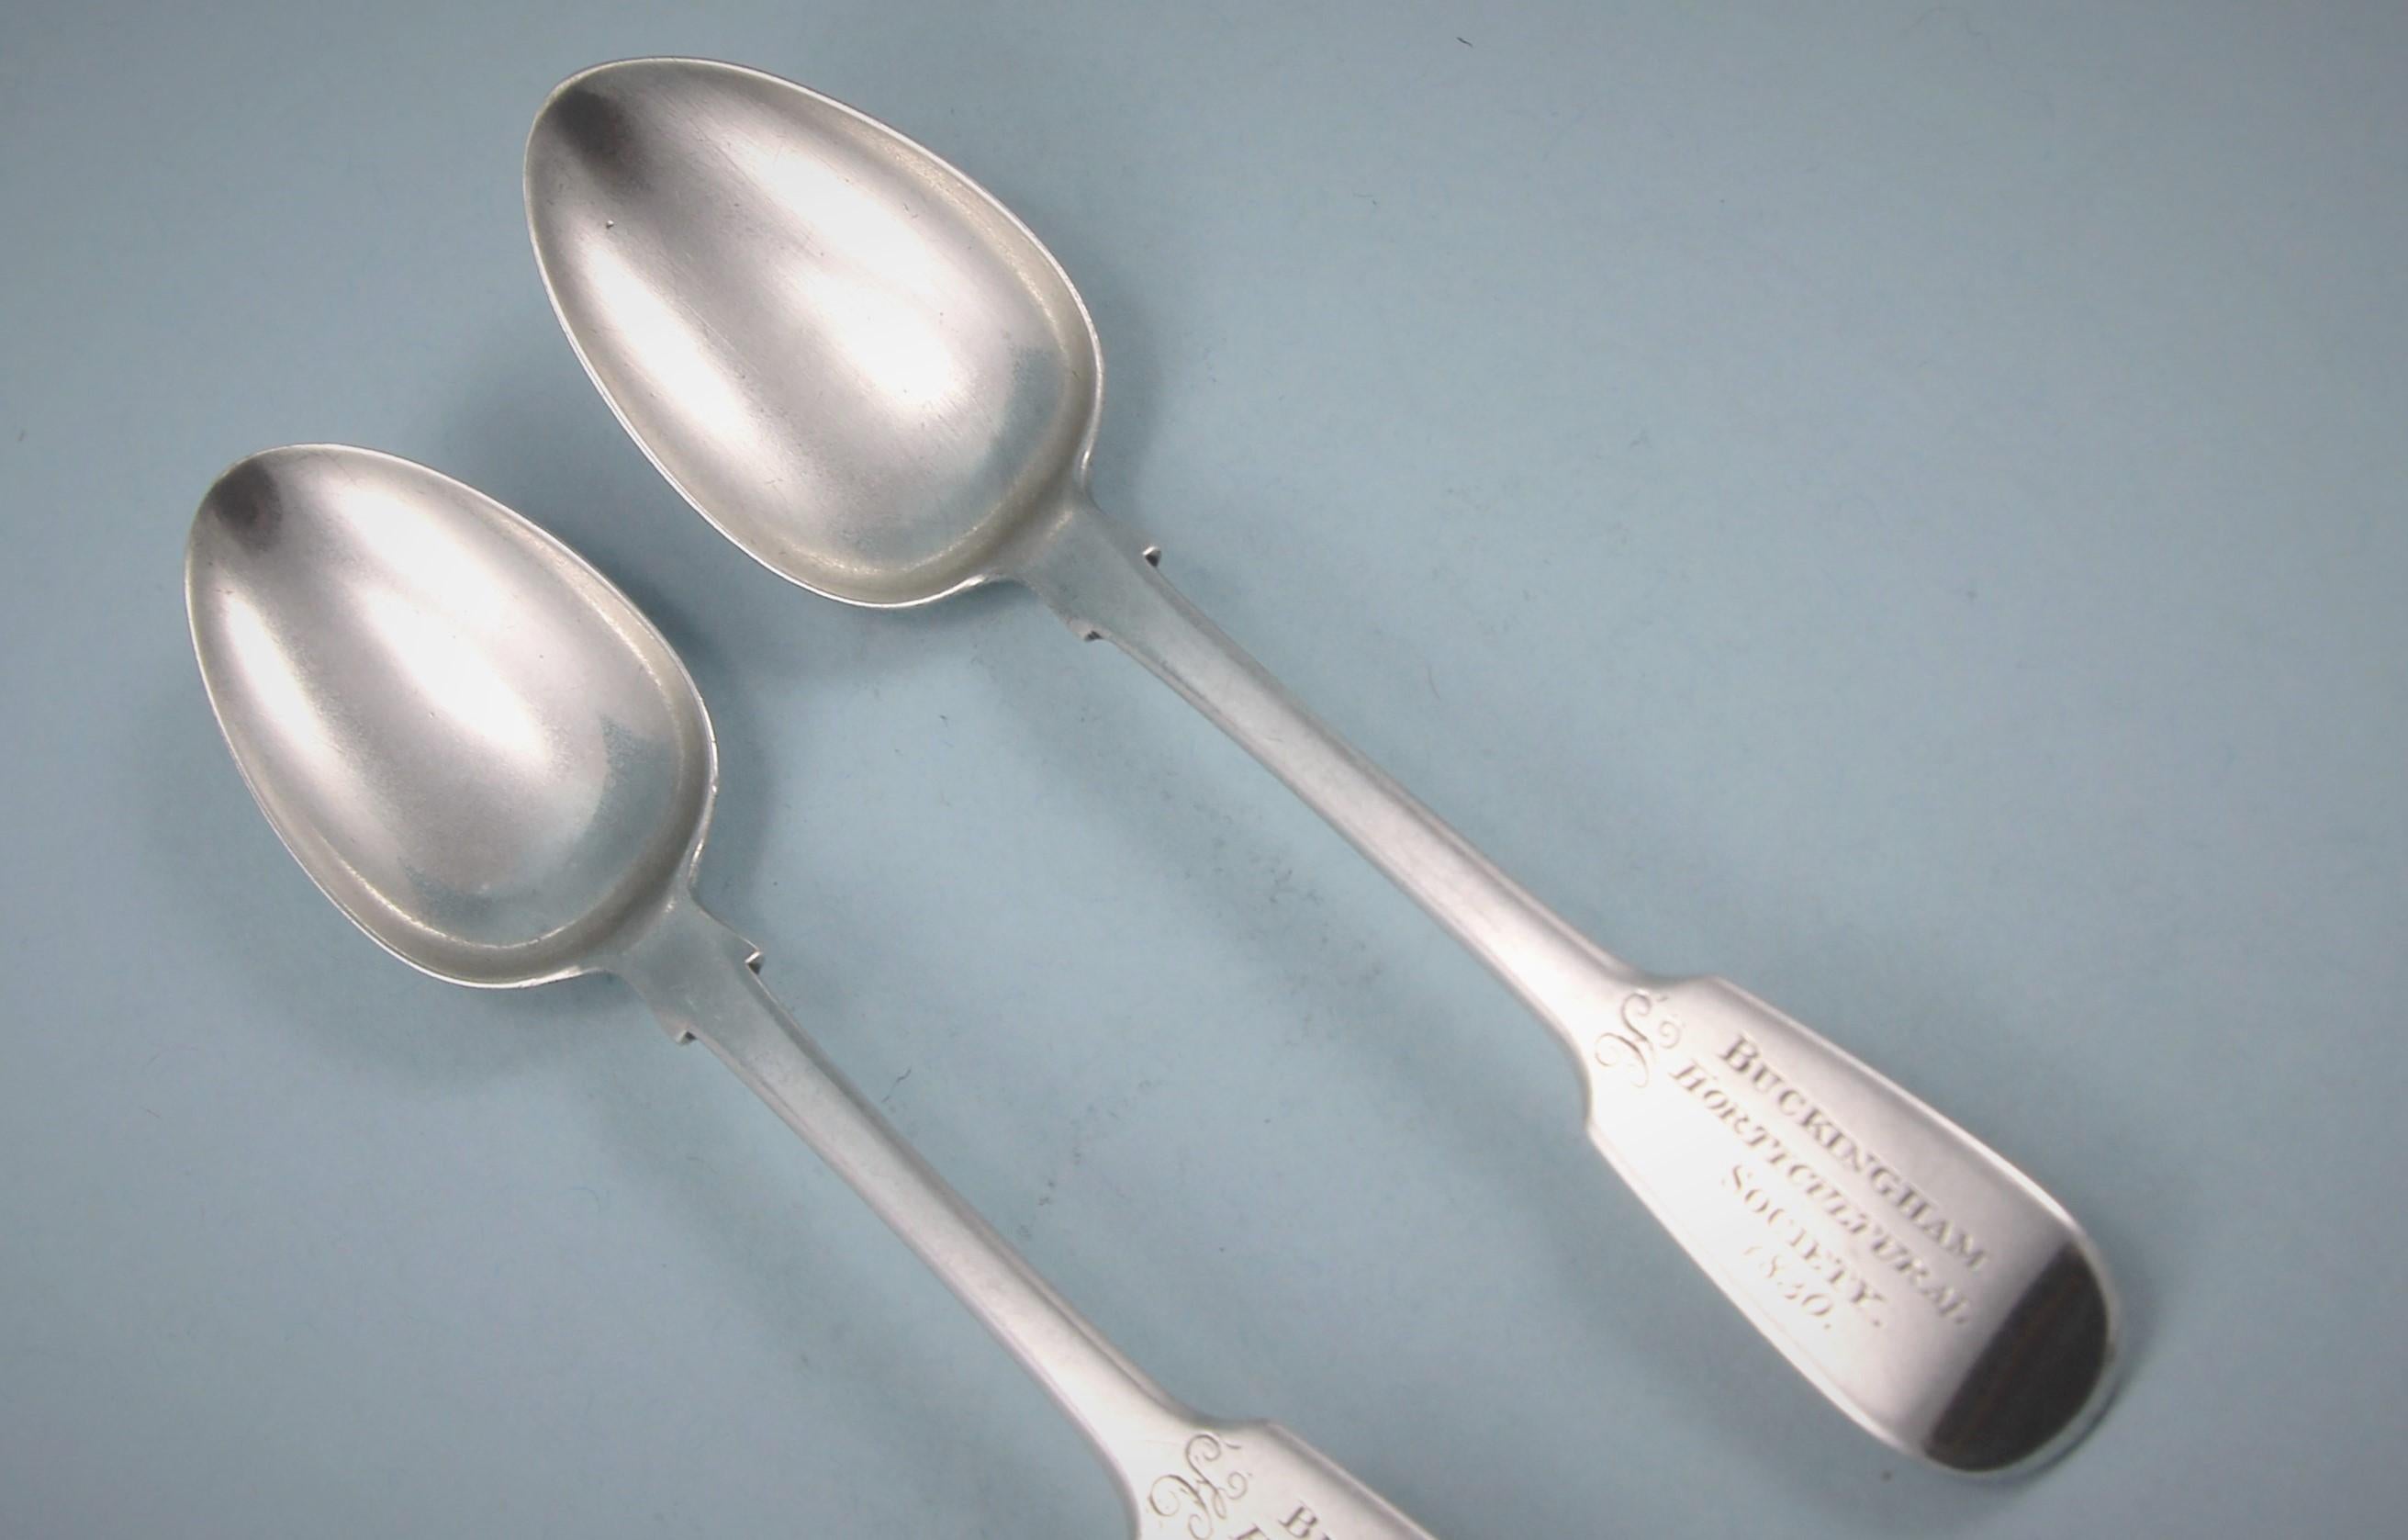 Very nice pair of William IV sterling silver Buckingham Horticultural Society prize teaspoons.
Maker: William Eaton. London 1830  

According to the Gardener's Magazine Vol VI 1830 these spoons were awarded to Mr Horwood of Bicester for a variety